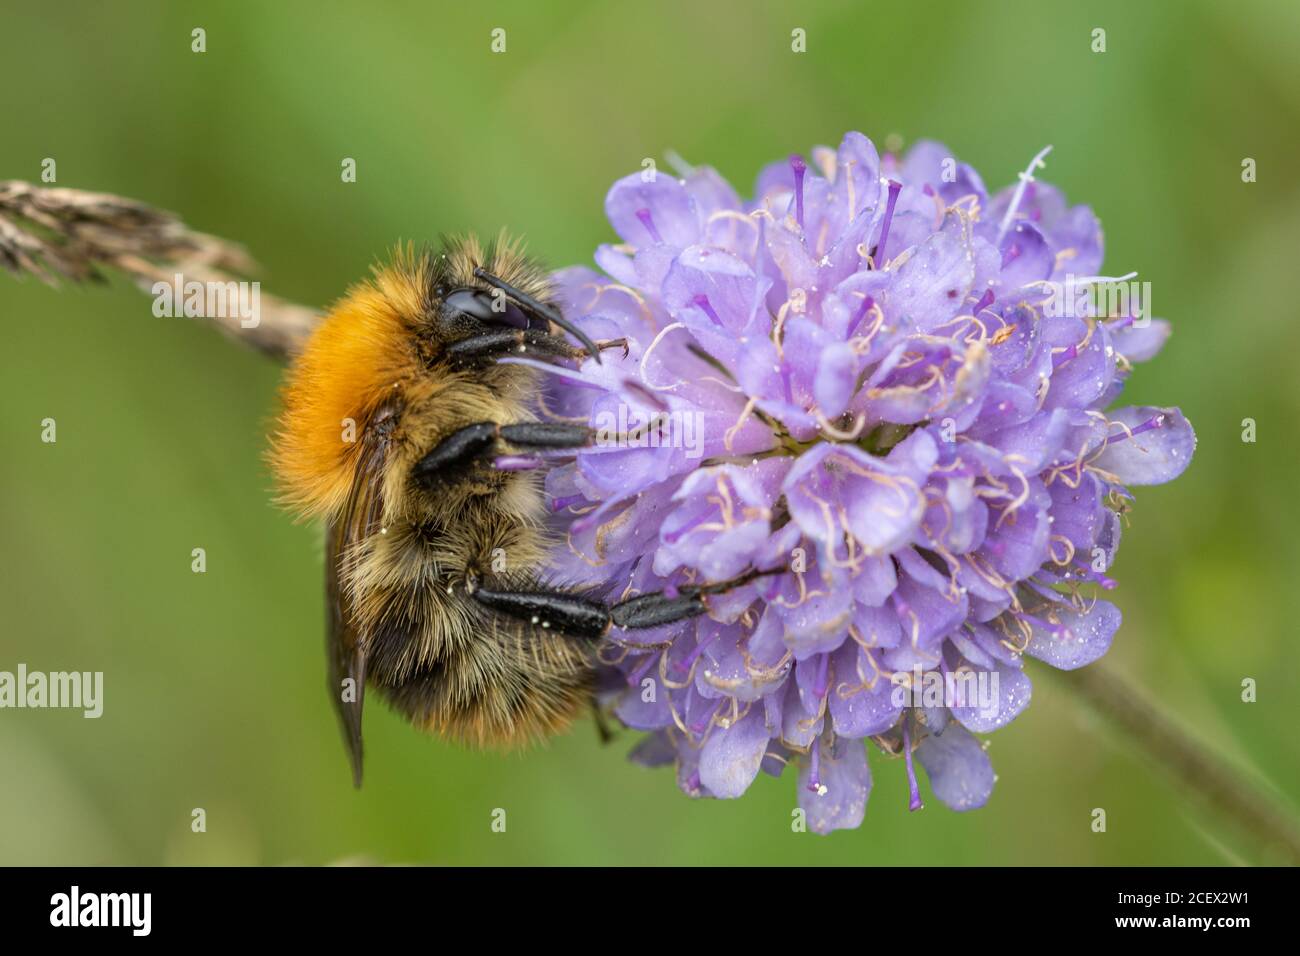 Common carder bee (Bombus pascuorum), a species of bumblebee nectaring on a scabious wildflower, UK, august Stock Photo